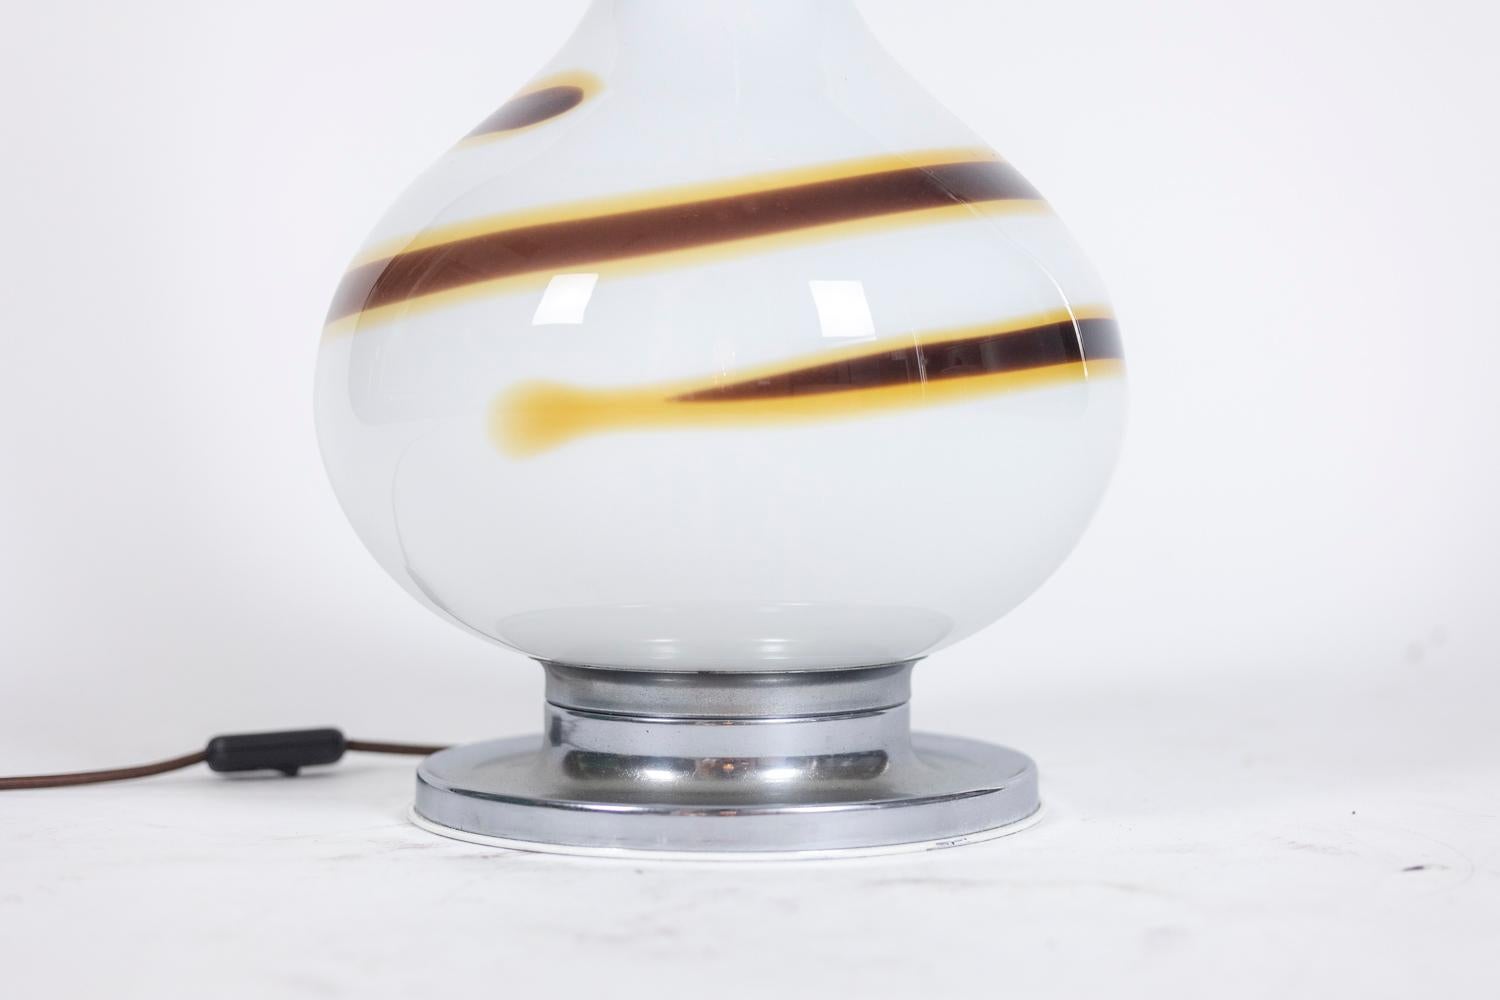 White glass lamp decorated with a brown and yellow spiral, baluster shape. Base and top of the lamp in chromed metal.

Italian work made in the 1970s.